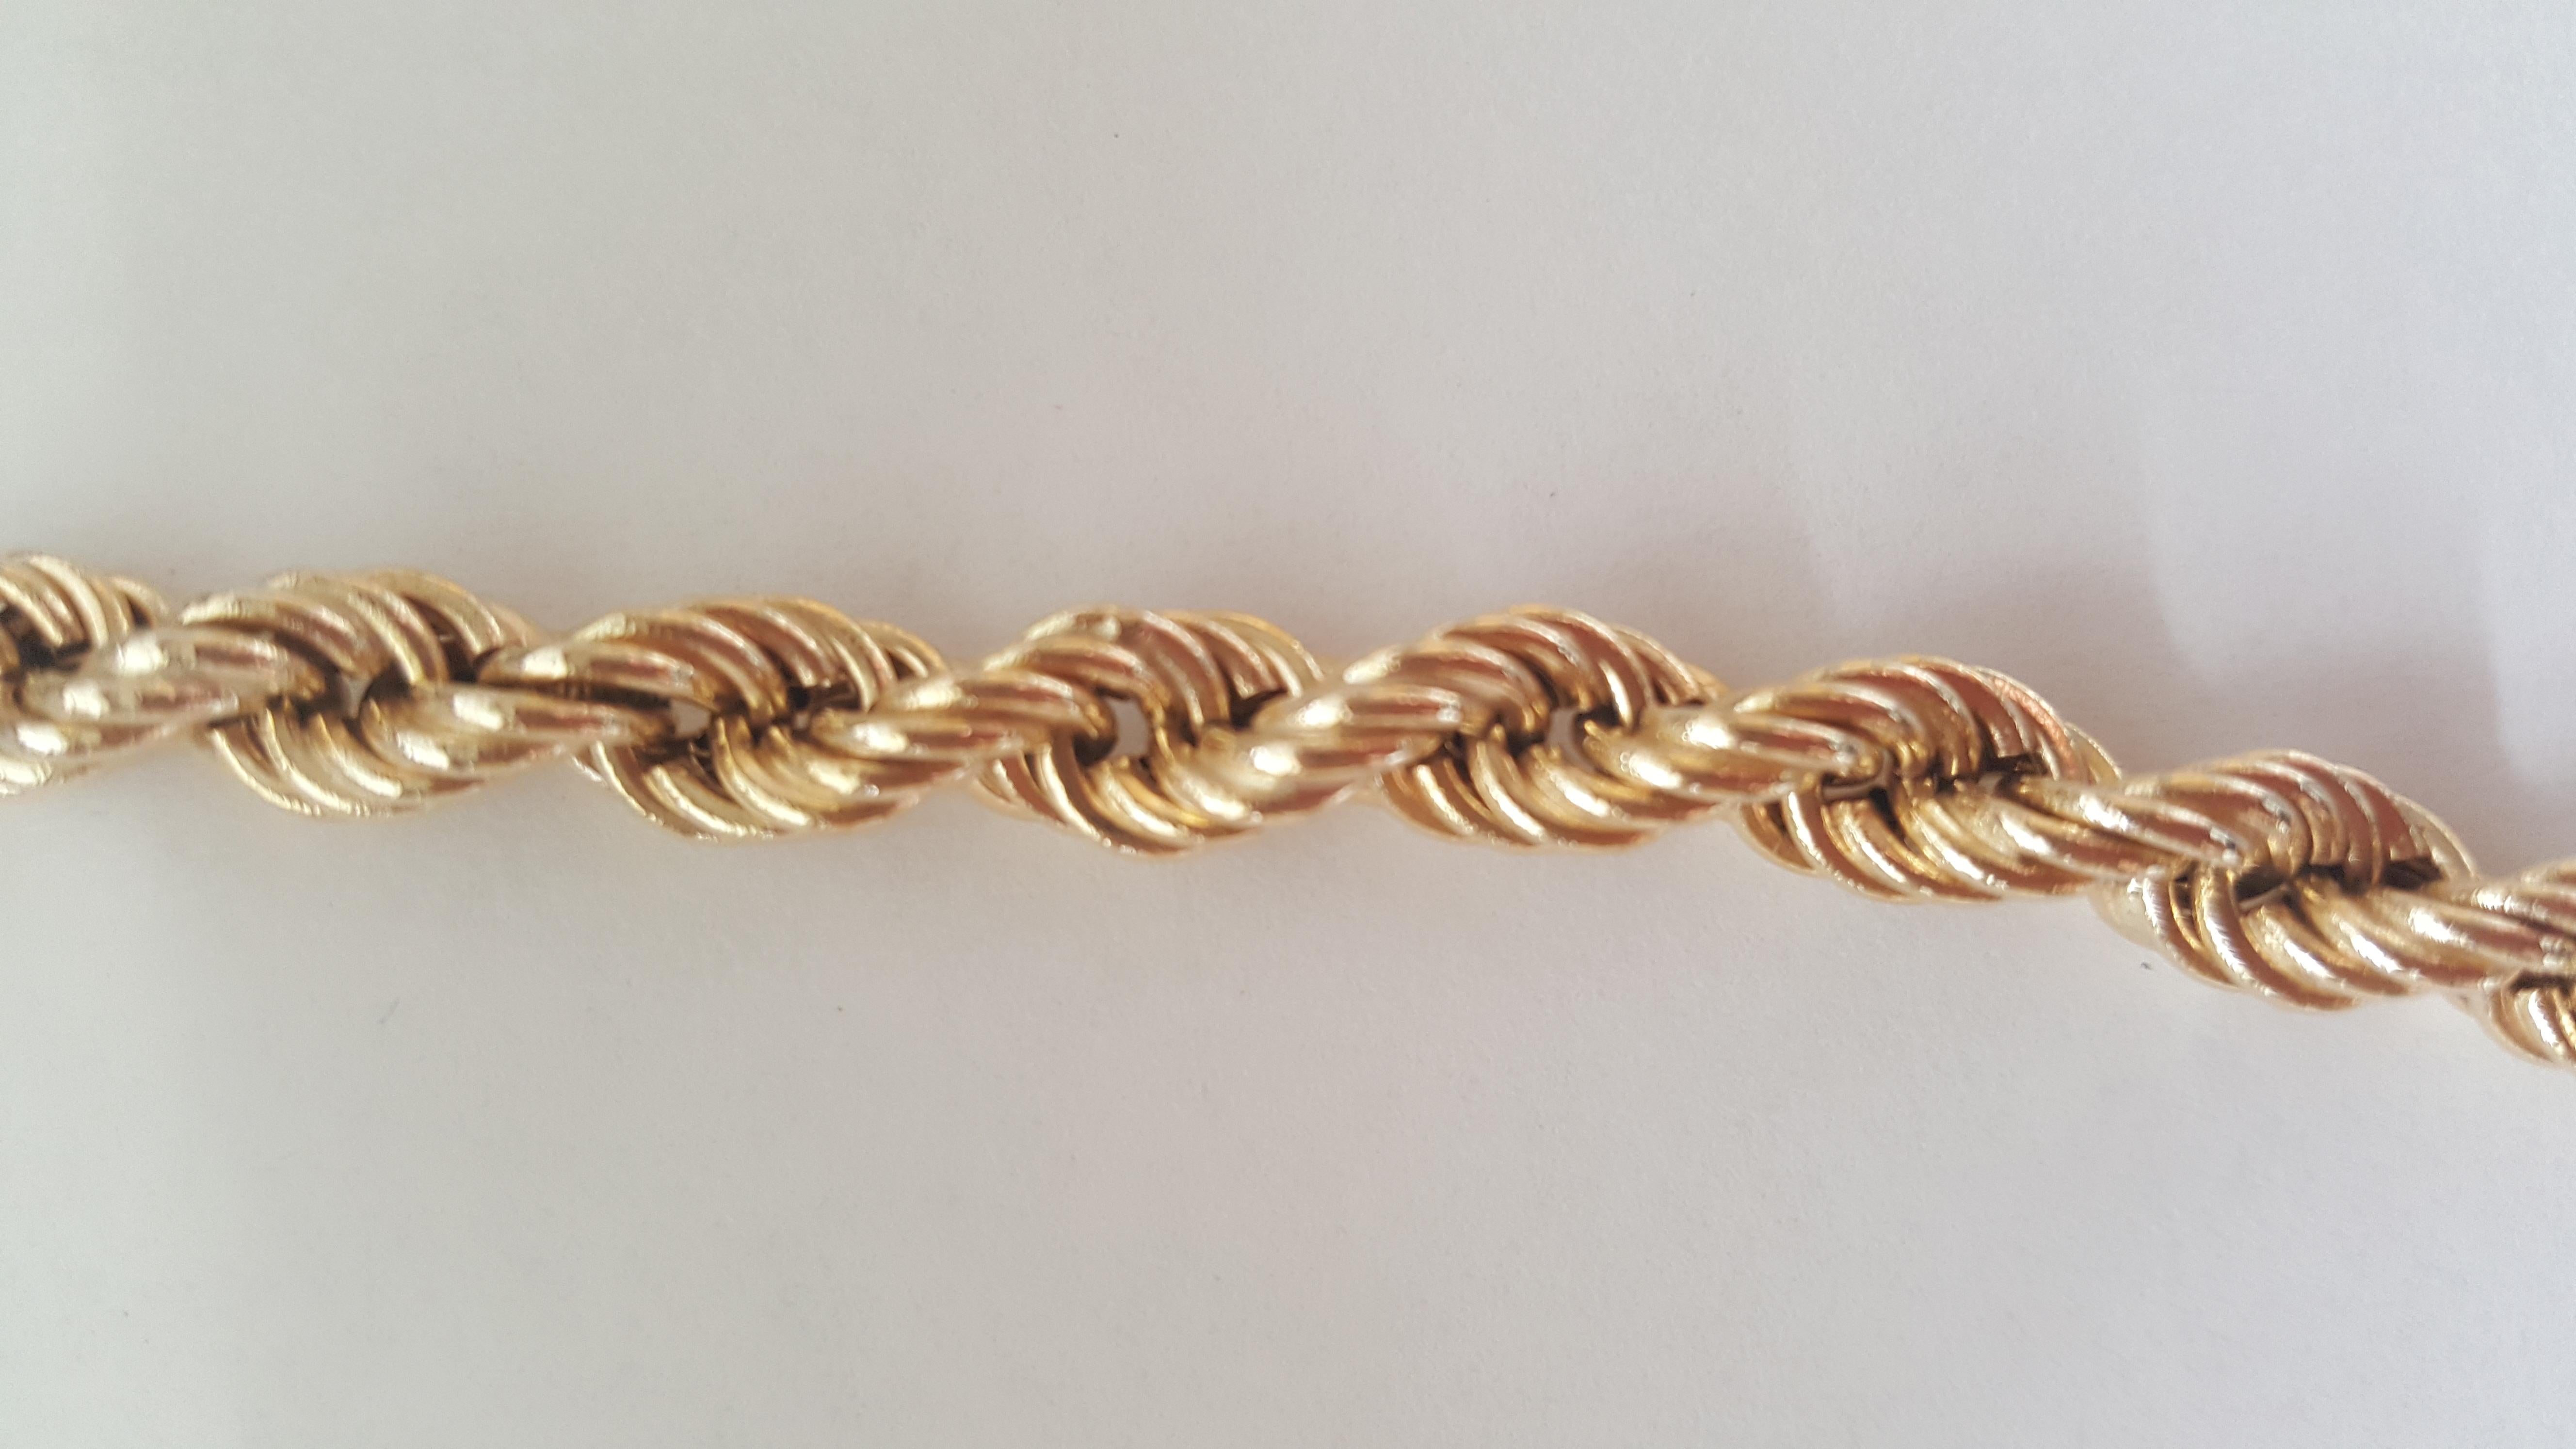 14kt yellow gold rope chain that is 30 inches in length, 6.6mm wide, weighs 42.3 grams, is hollow, and in very good condition. Secured with a push-in clasp and secured with figure-8 latch, stamped 14kt. Very good condition.

A versatile chain that